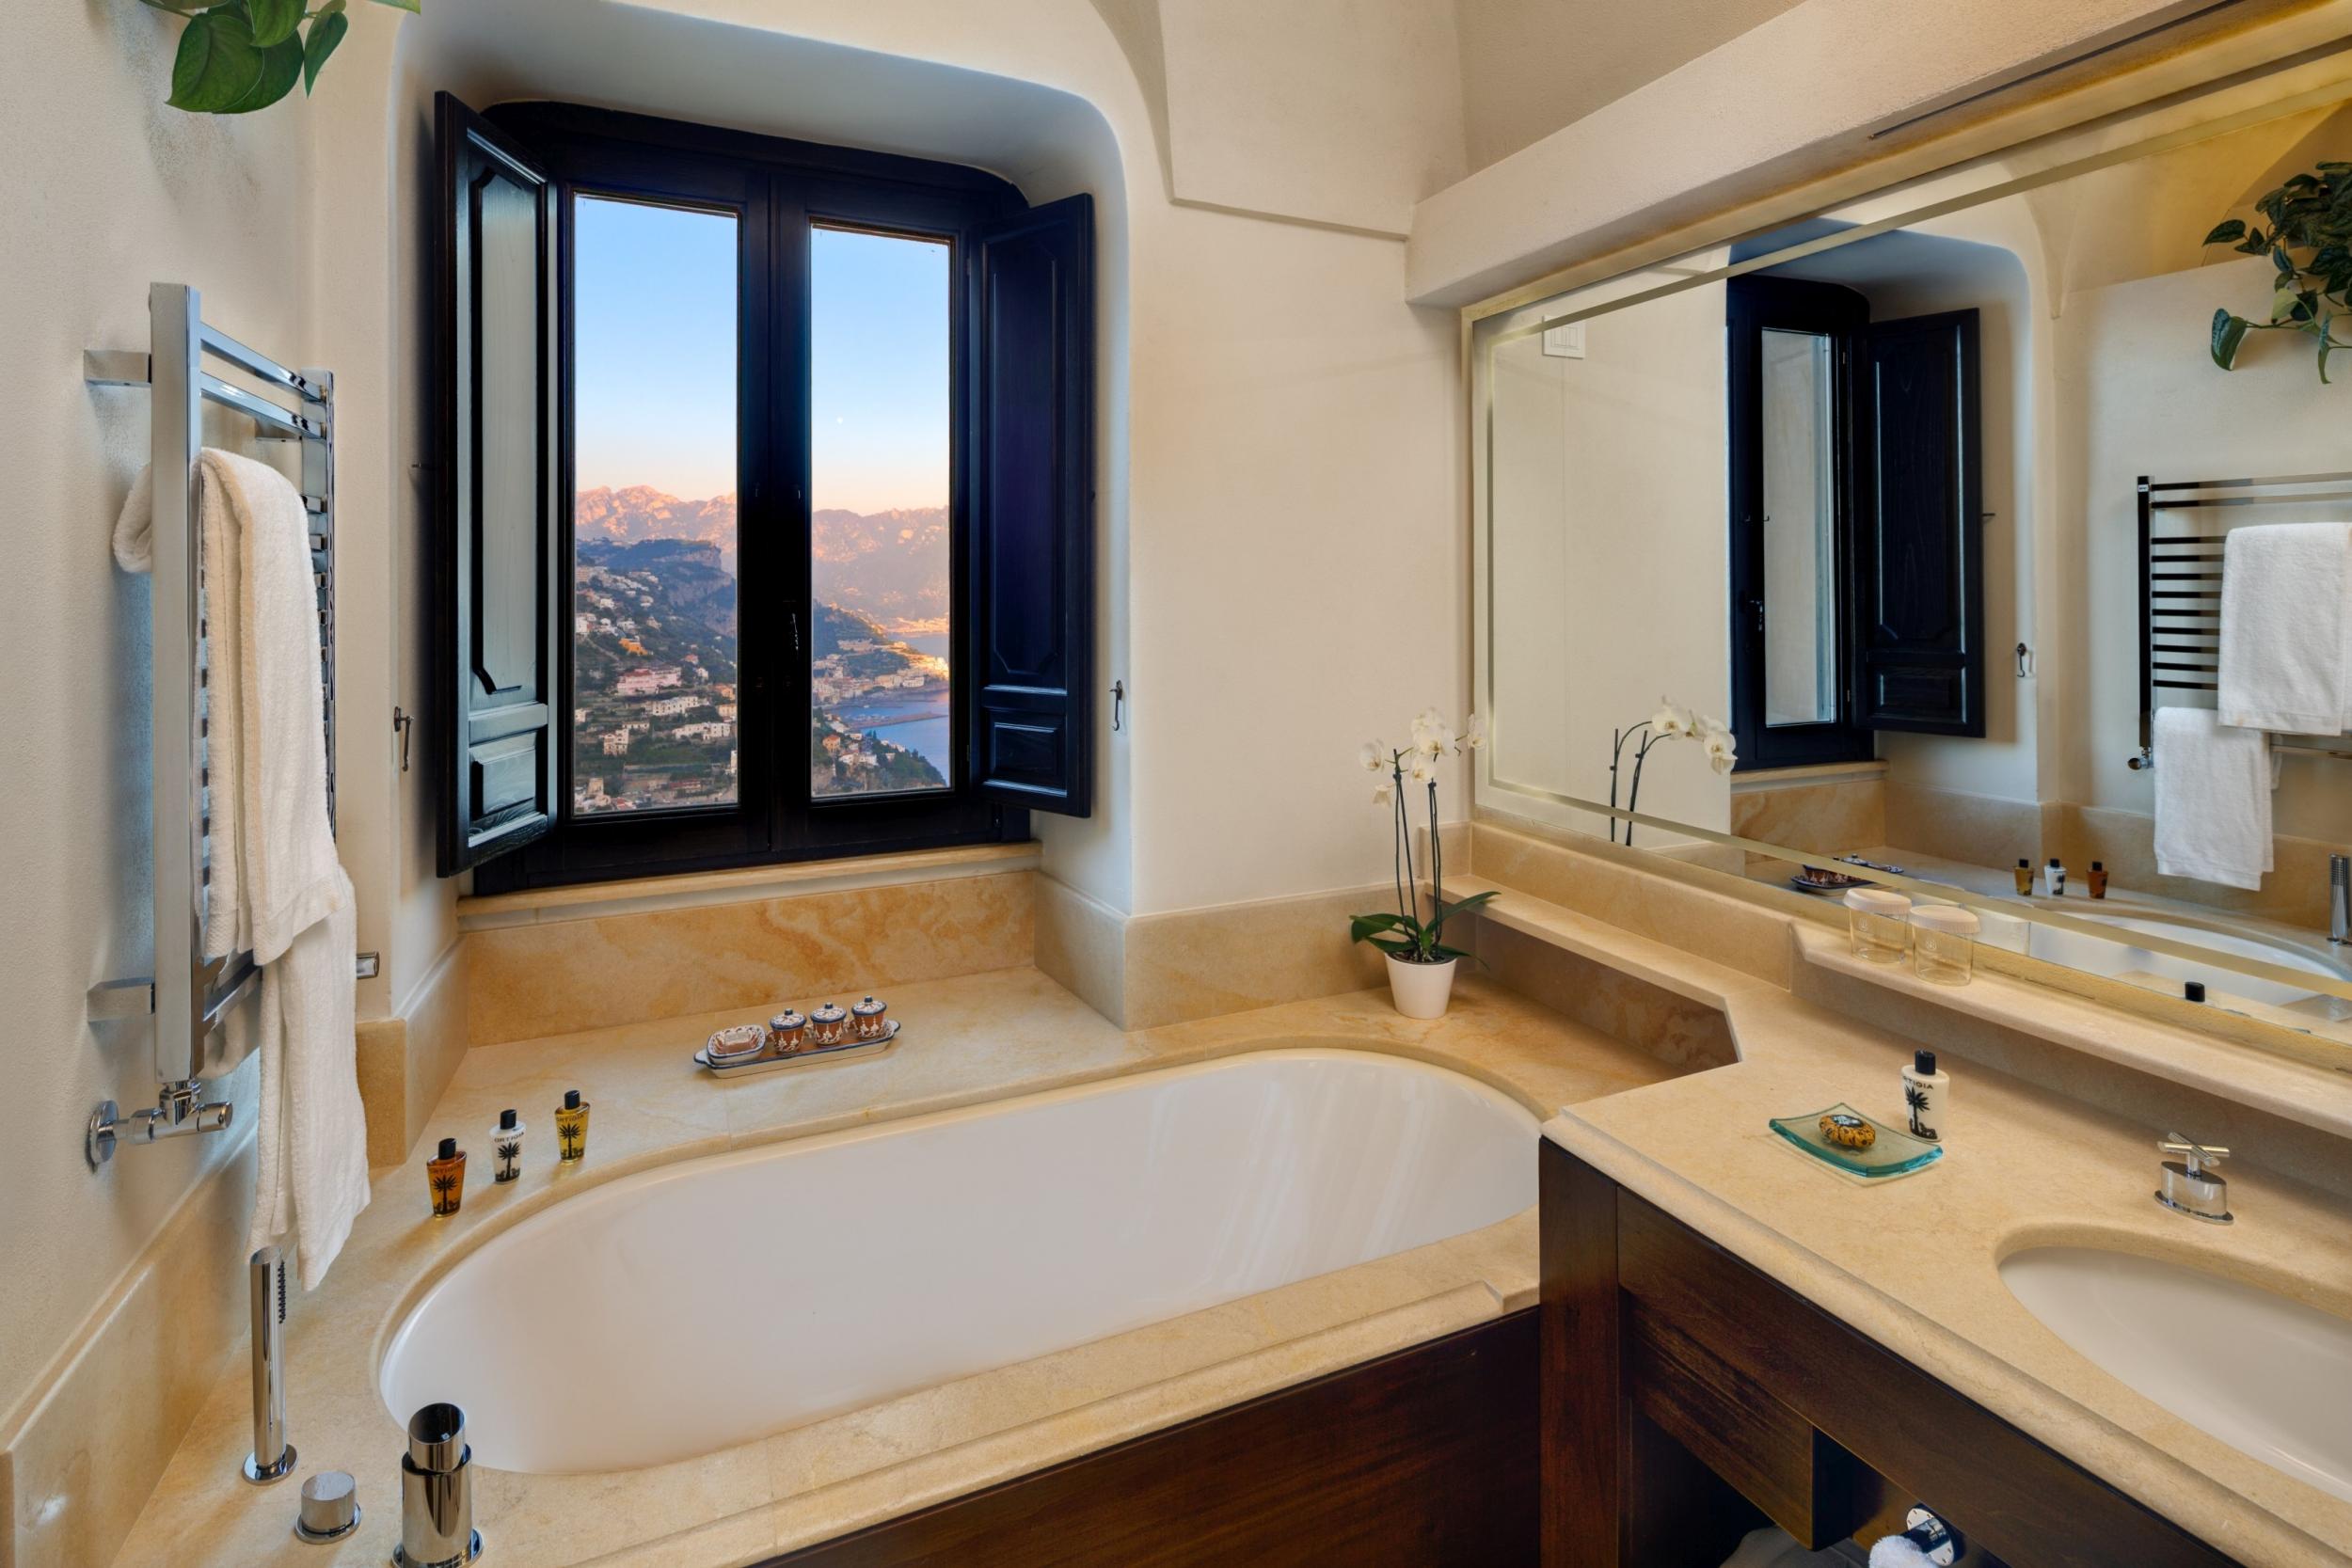 Plush bathrooms with a jaw-dropping view